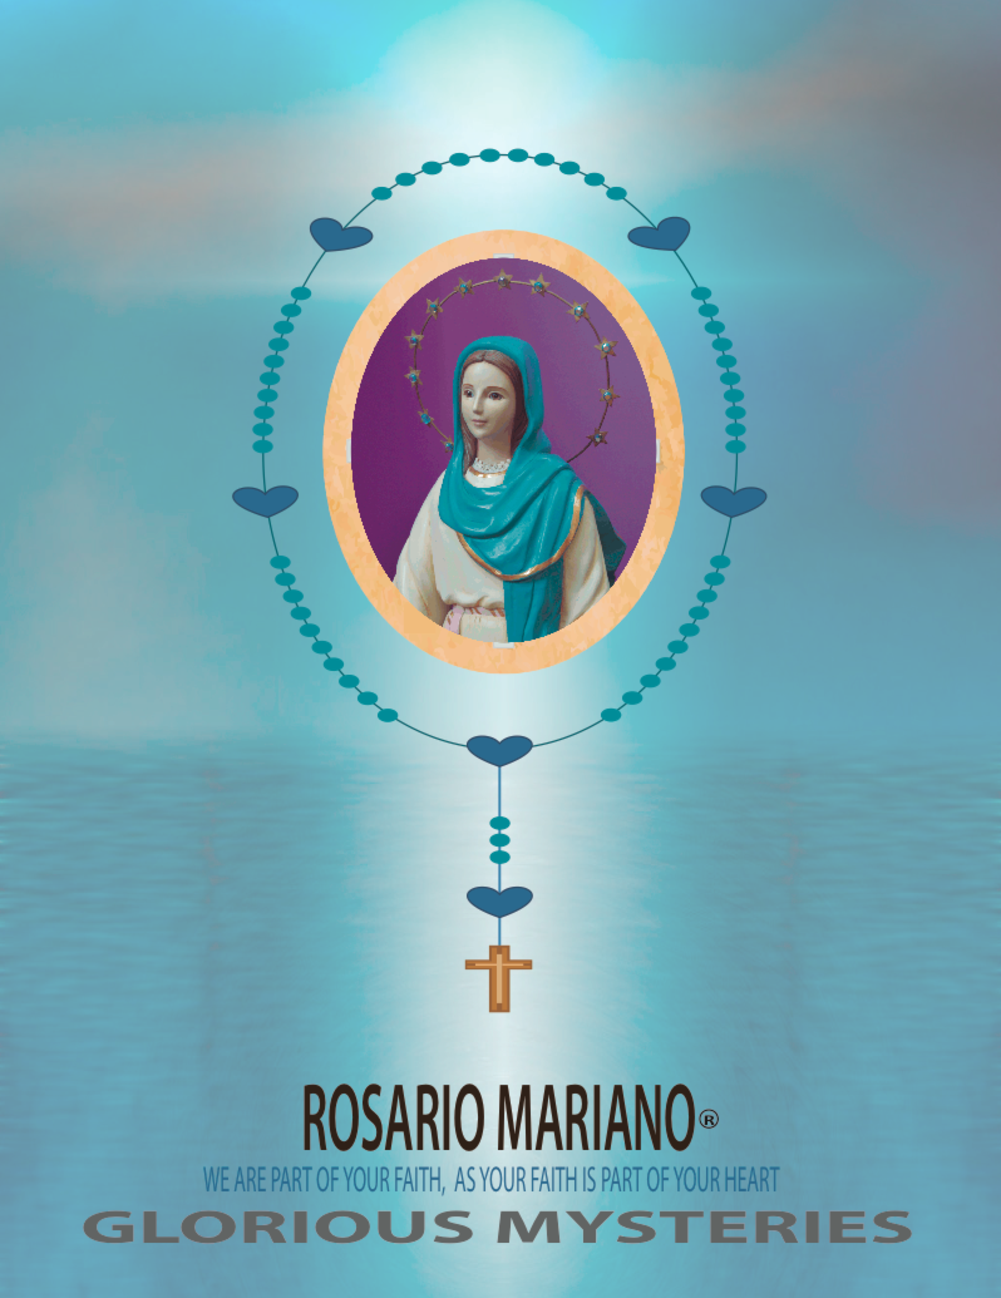 THE SWORD OF THE HOLY SPIRIT THE GOSPEL OF THE LORD, THE SPIRITUAL SWORD OF VIRGIN MARY: THE HOLY ROSARY; WELDED HERE BY THE HEARTS PRAY OF ROSARIO MARIANO GLORIOUS MYSTERIES